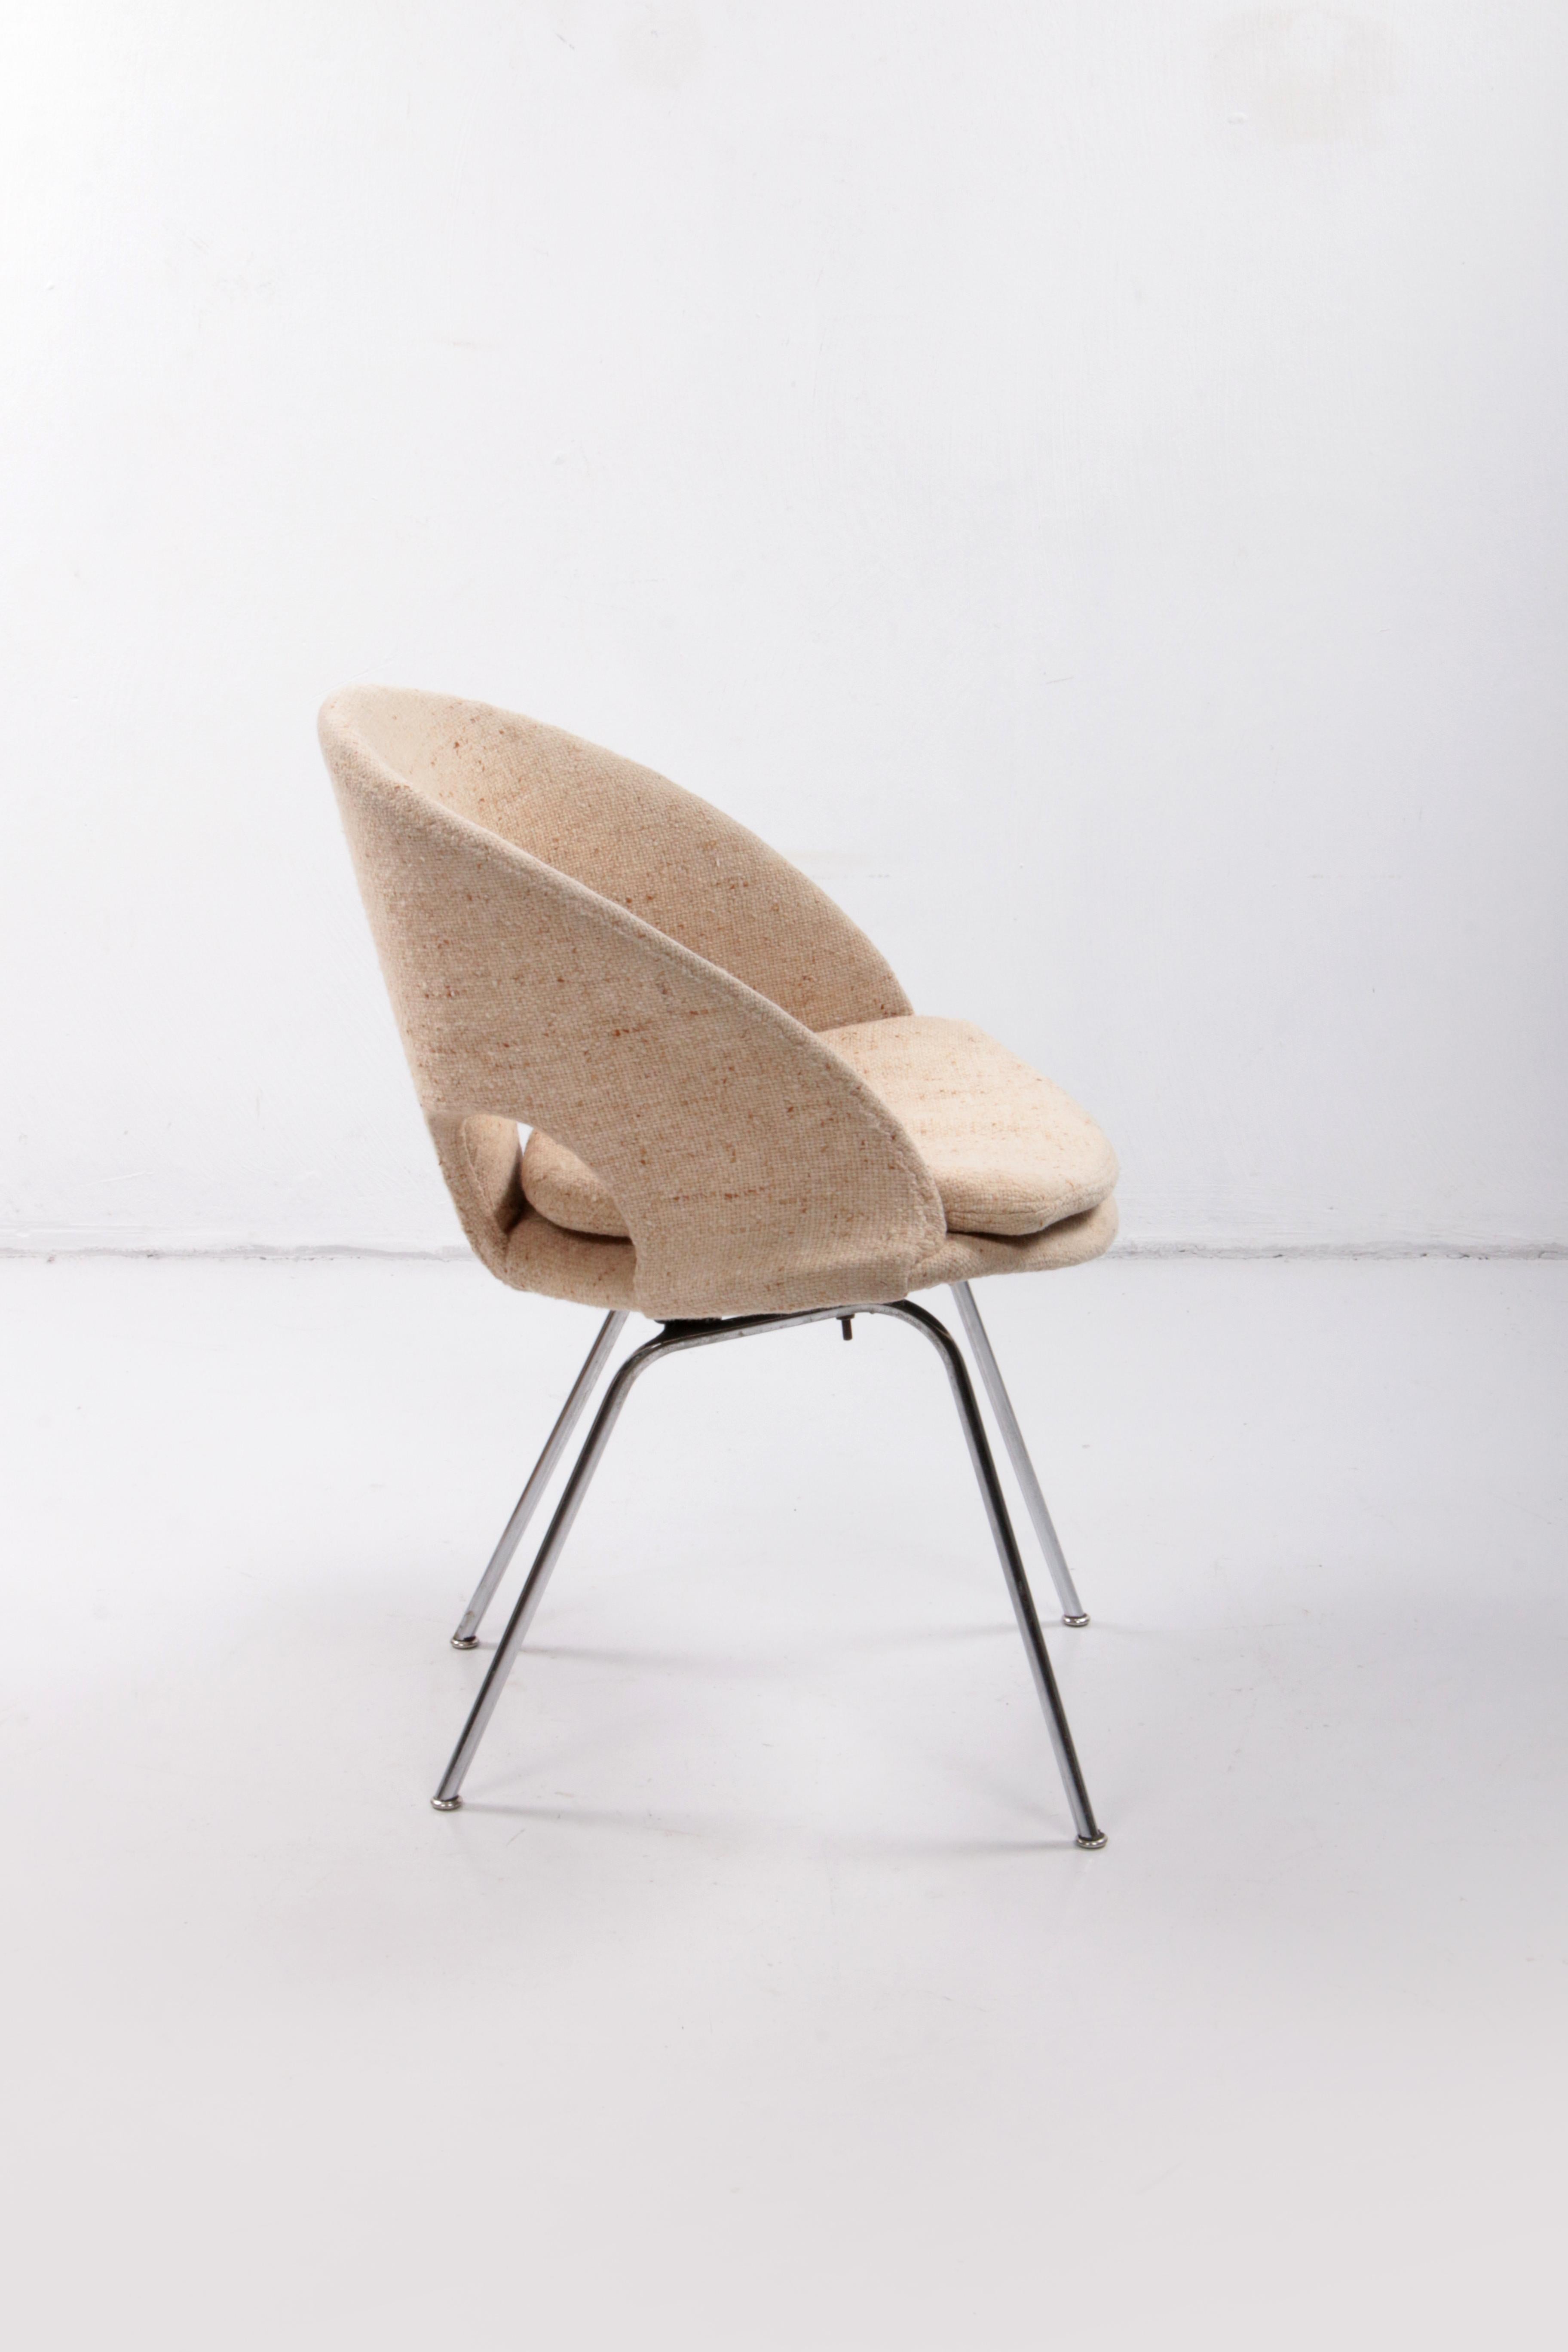 Walter Knoll Lounge Chair by Arno Votteler Model 350, 1950s For Sale 8